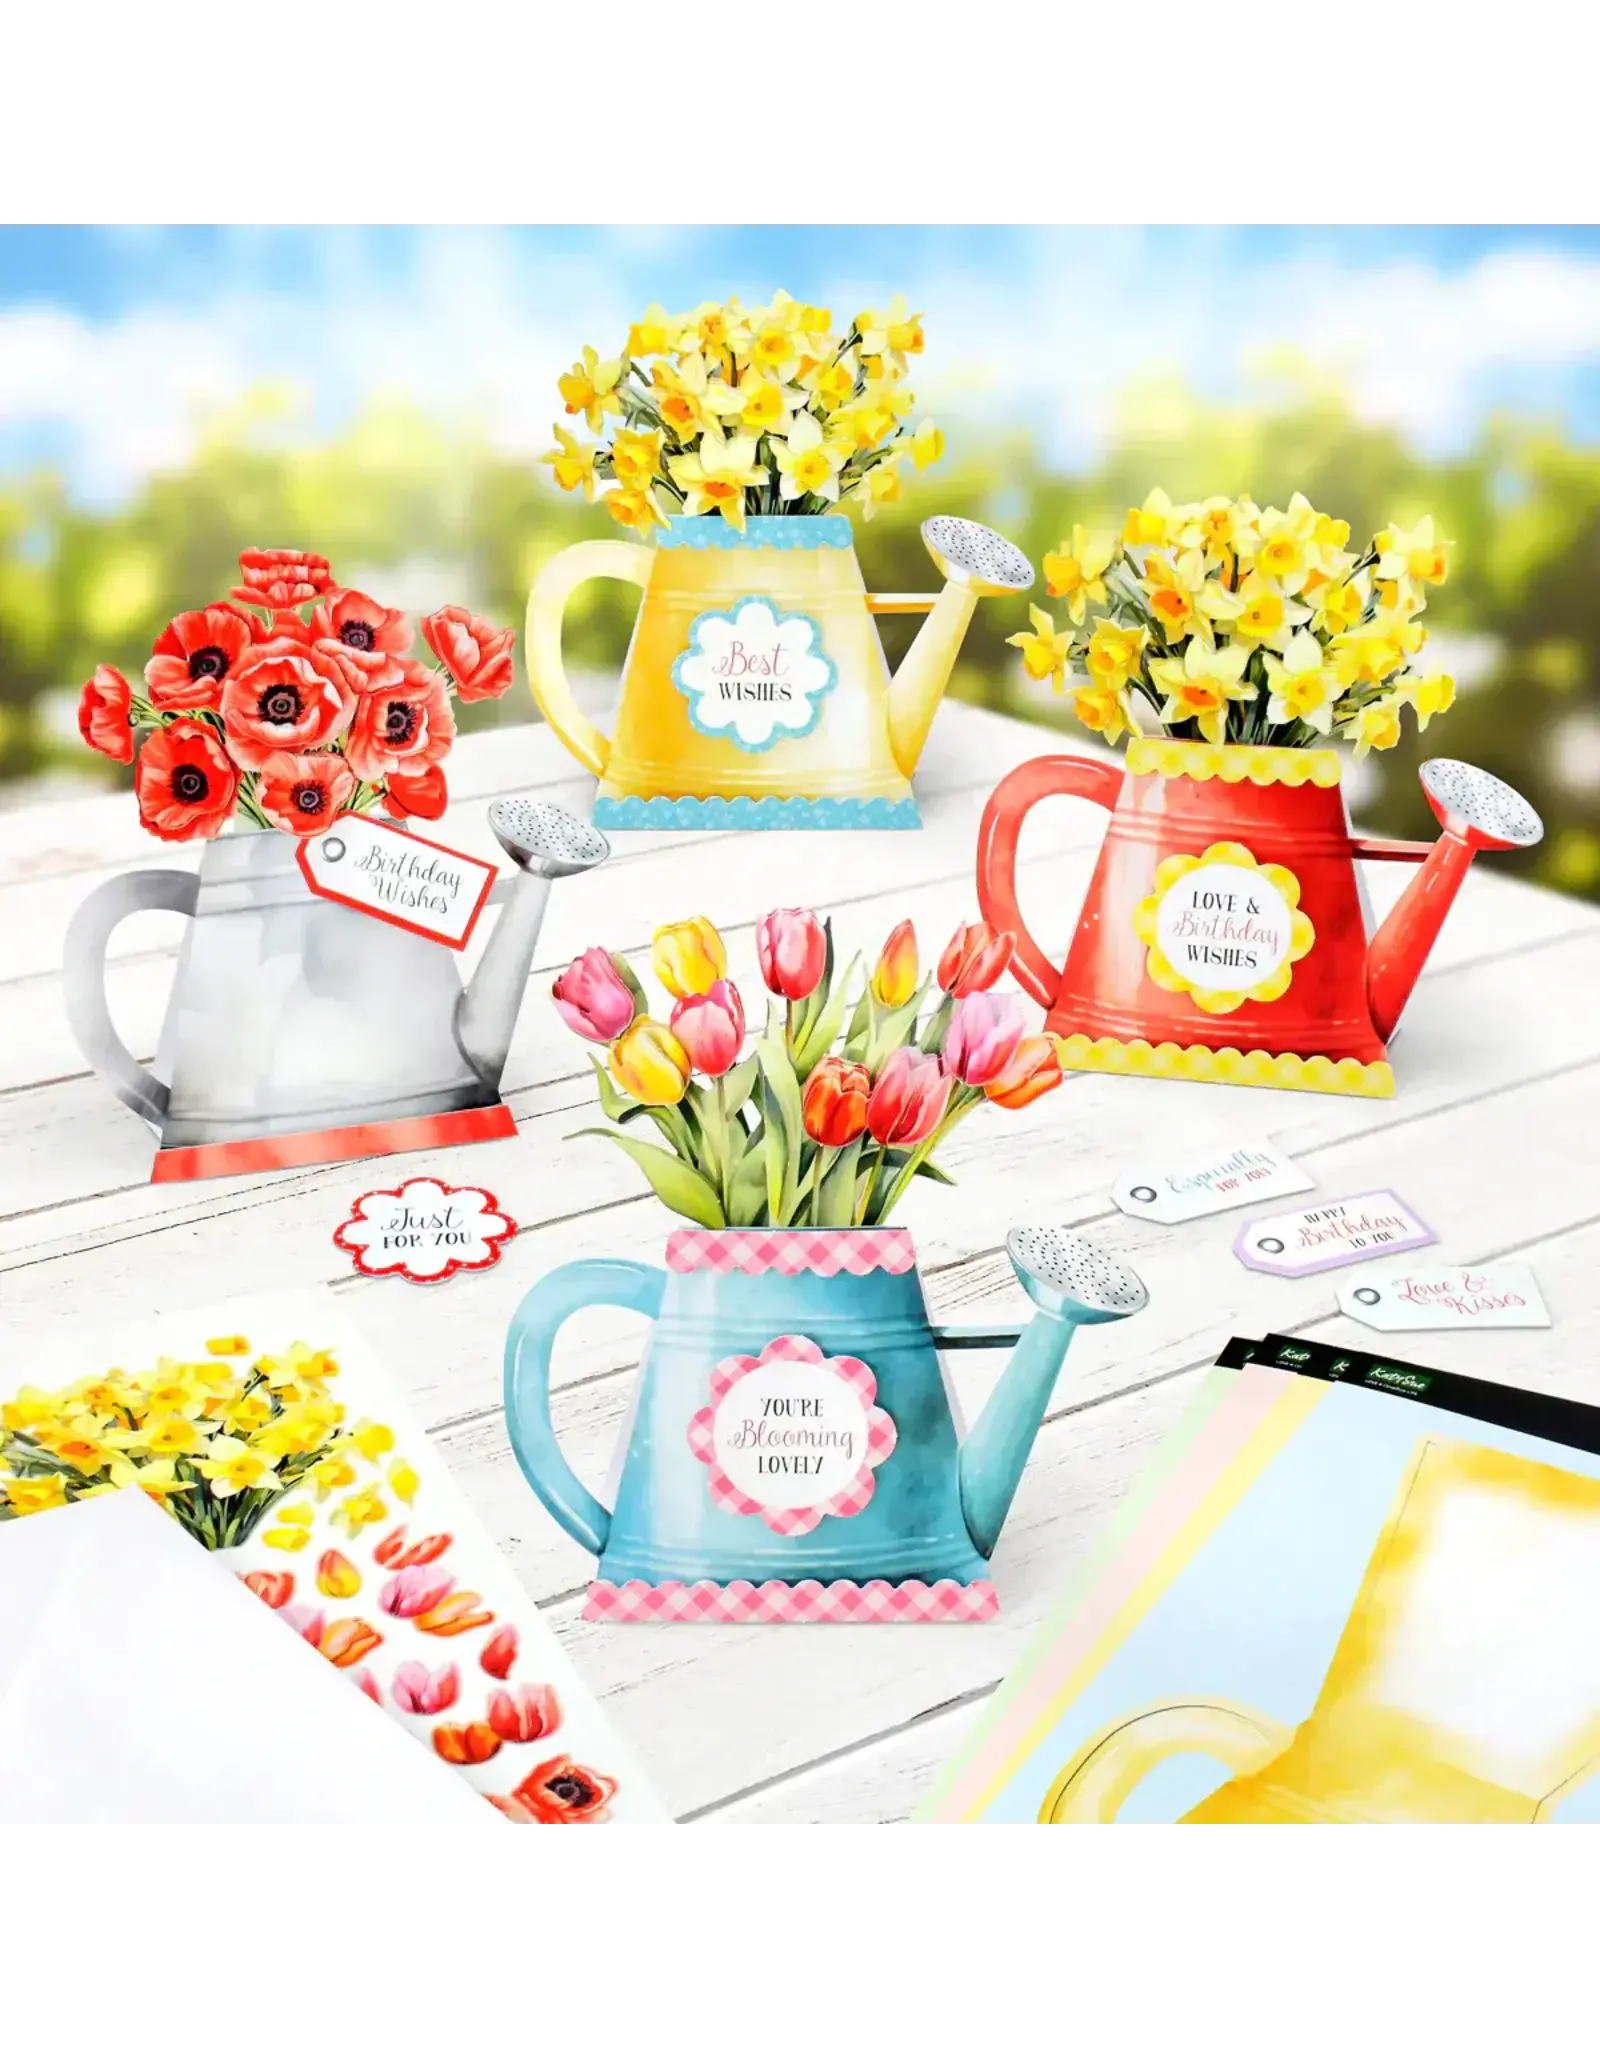 KATY SUE KATY SUE WATERING CAN BLOSSOMS & BLOOMS CARD MAKING KIT